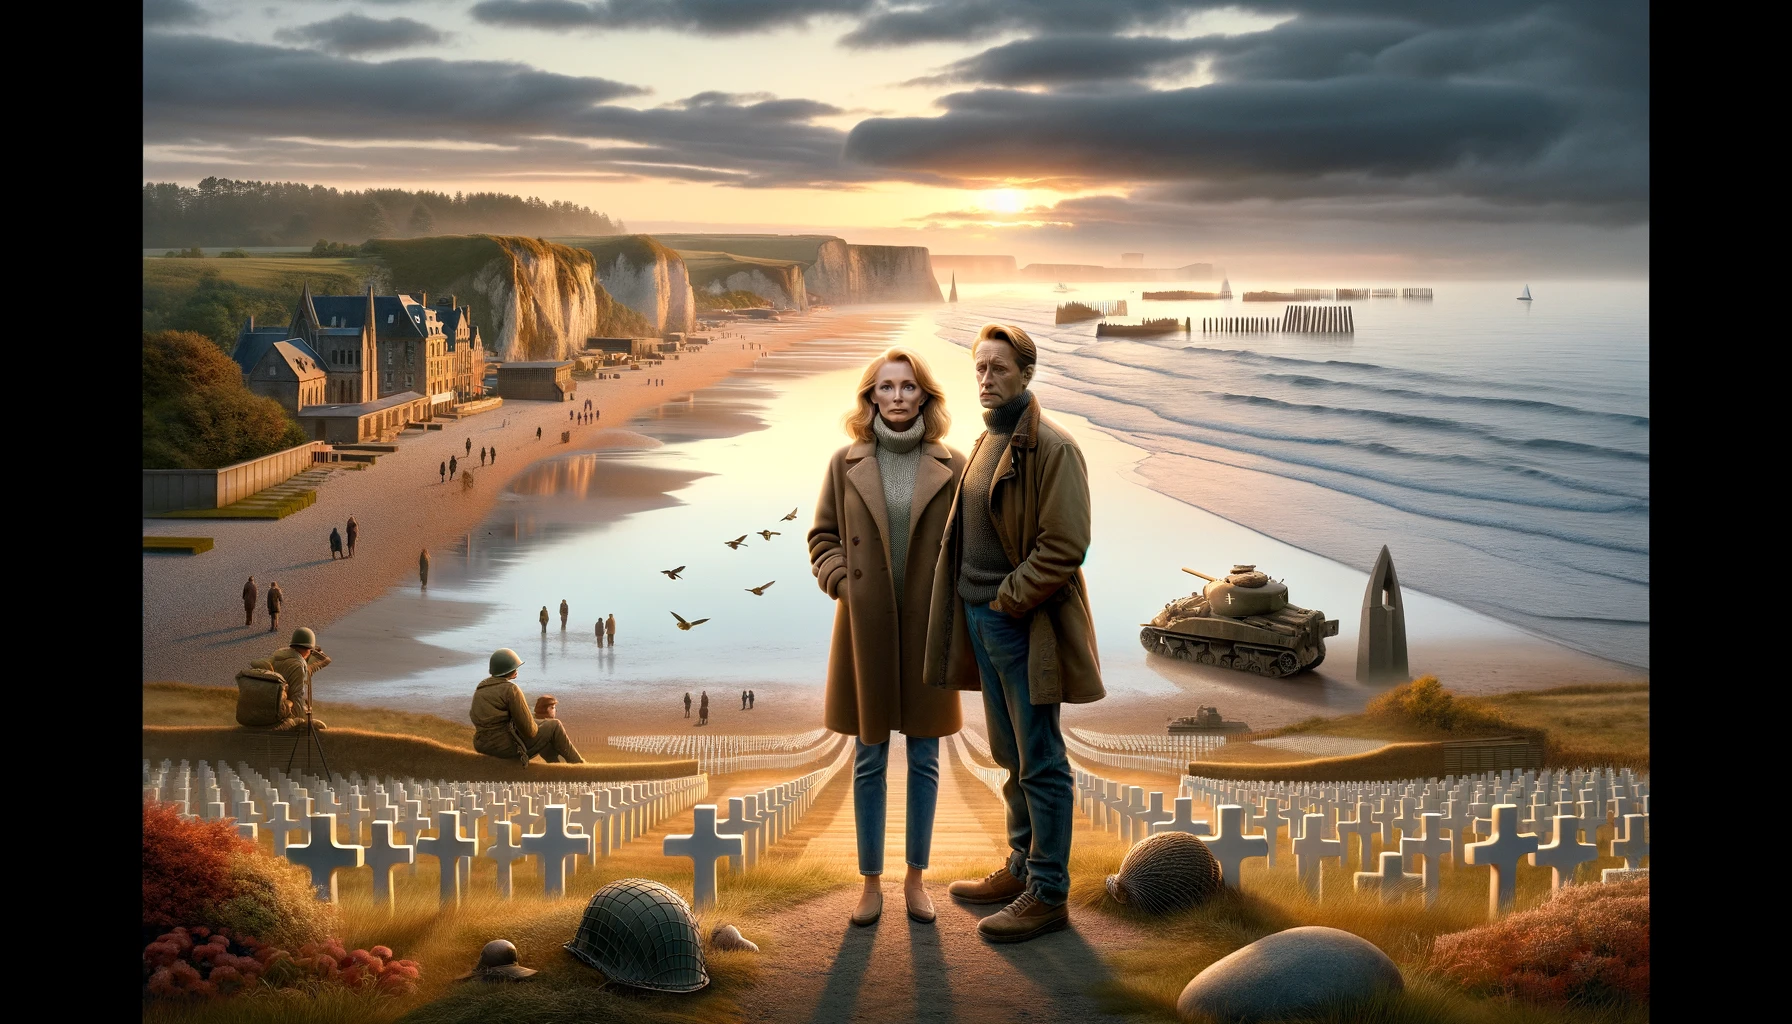 scene of the Normandy beaches, reflecting the echoes of history from WWII. Kathy Fields and her husband Doug are visiting these significant historical sites, capturing the solemn beauty and reflective atmosphere of the Normandy coastline.